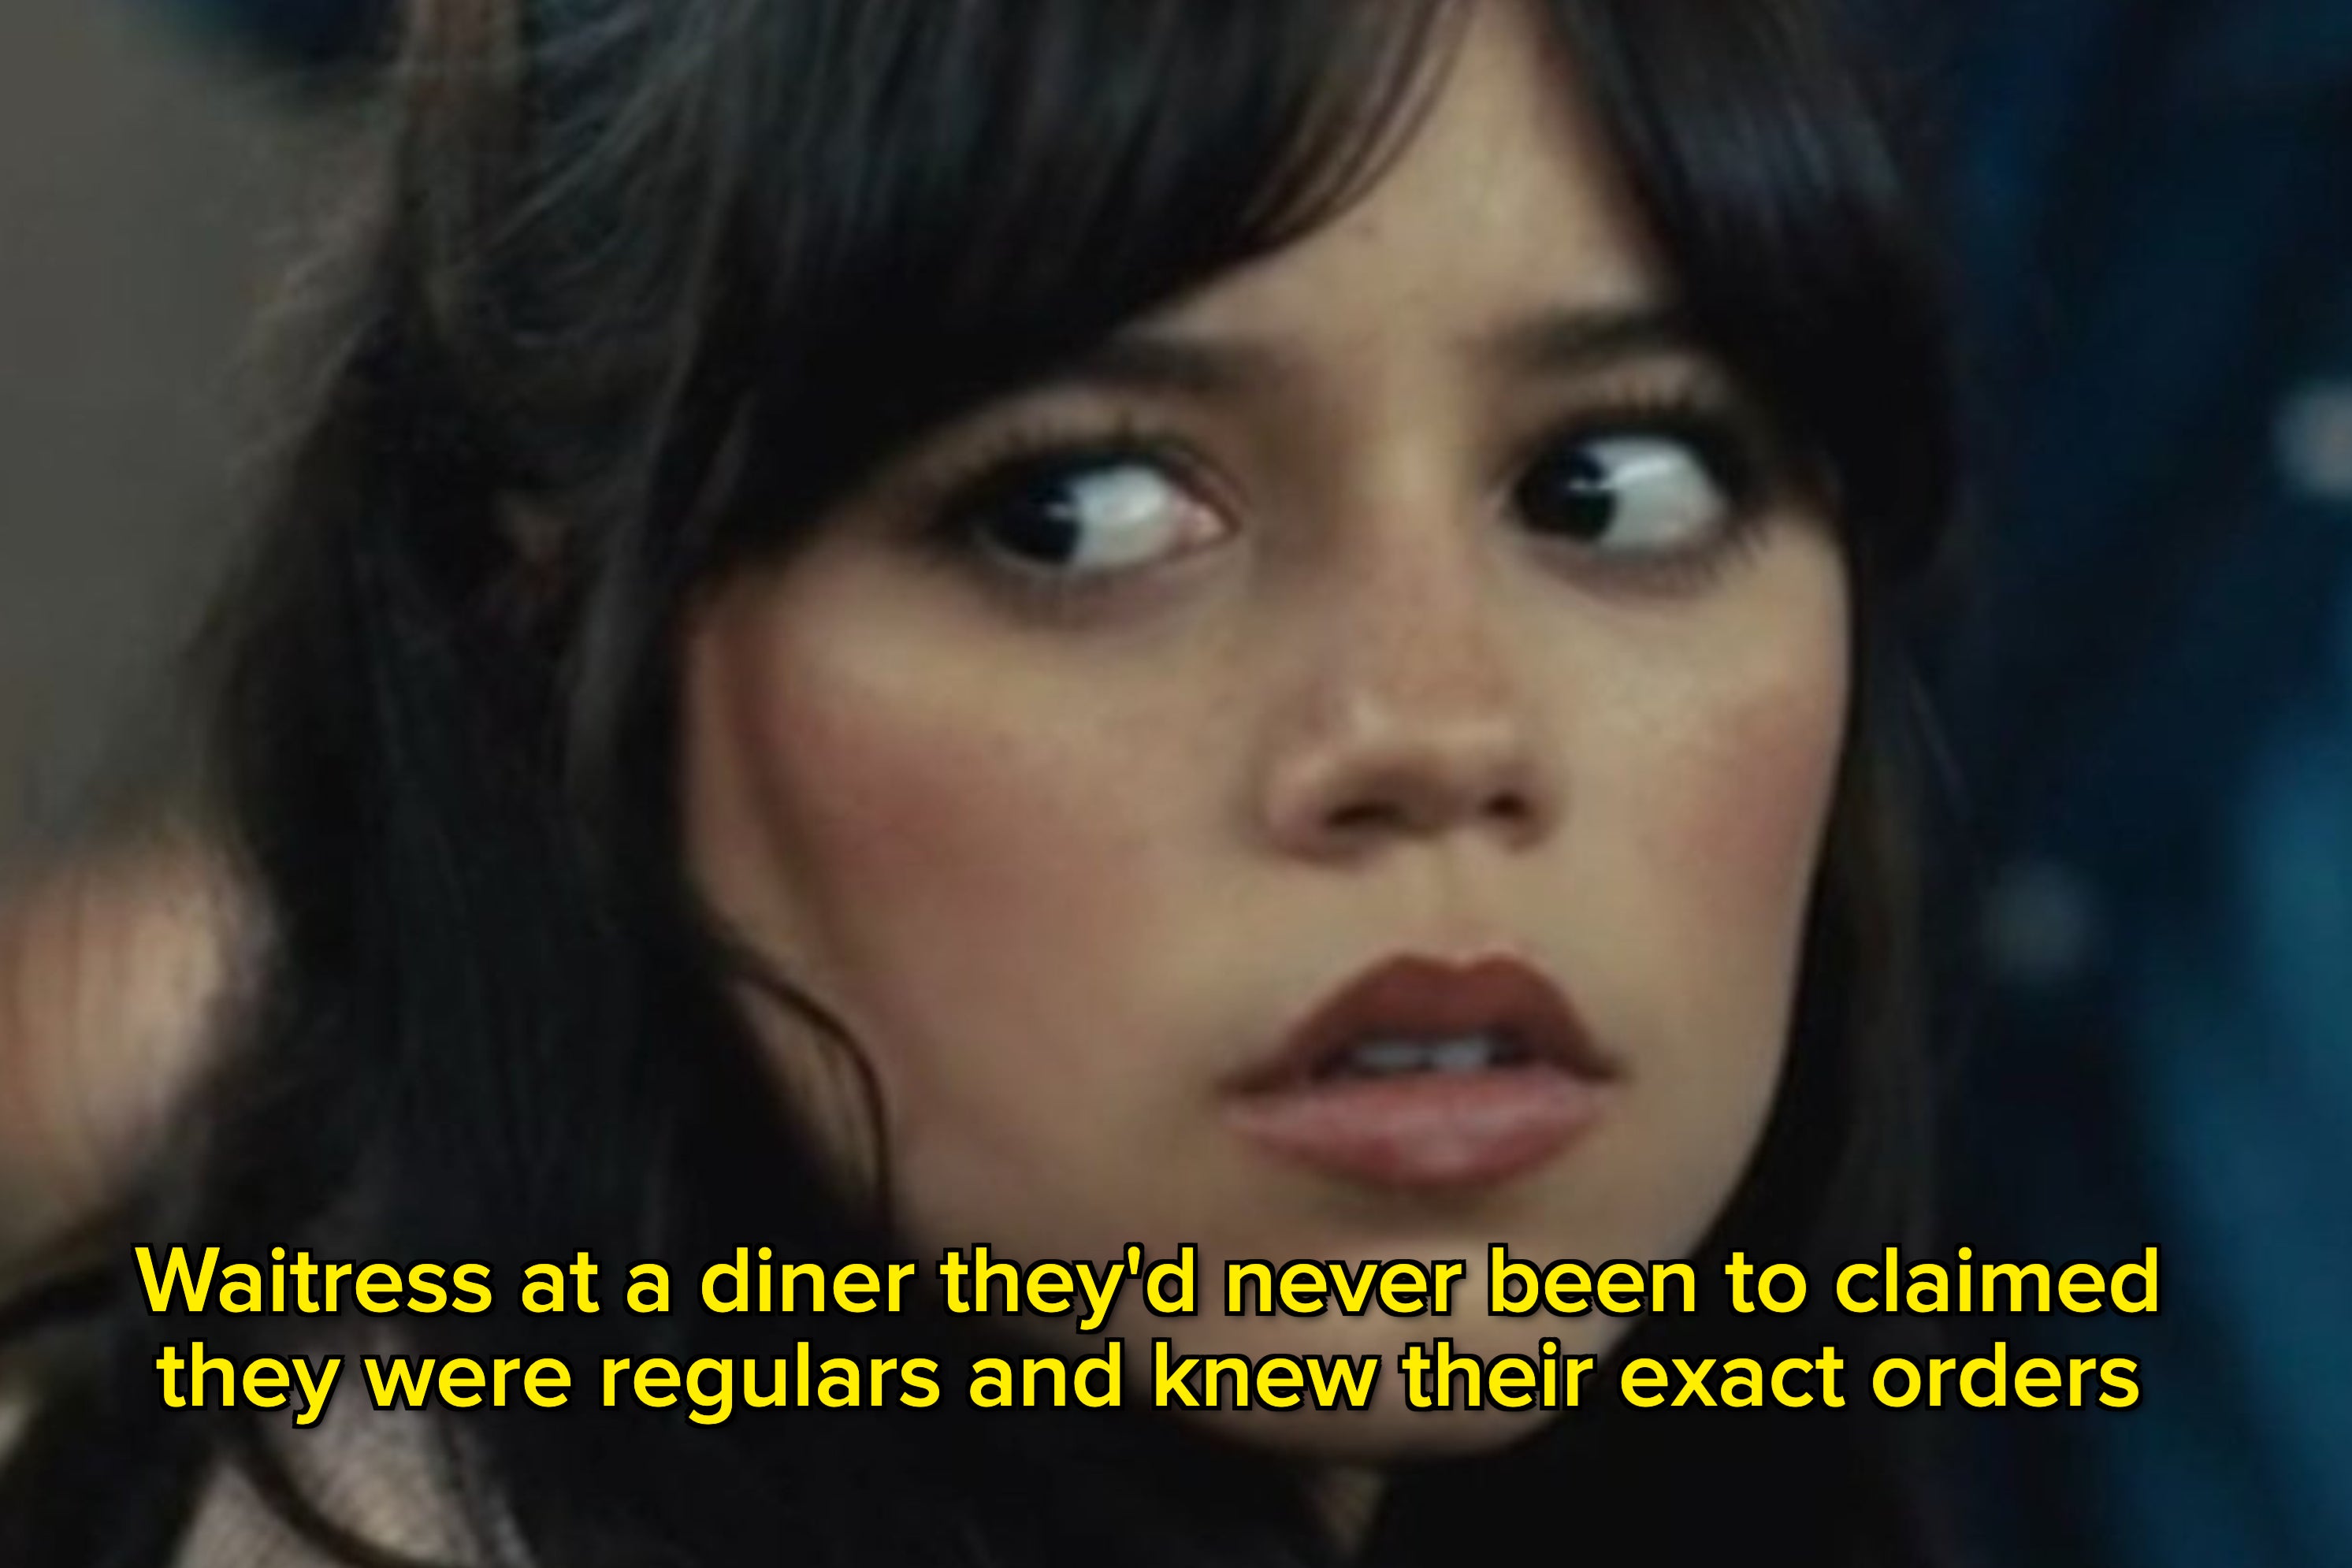 The Diner Doppelgängers, The Peculiar Penny Curse, And 21 Other Unsolved Mysteries That — Believe It Or Not — People Swear They Experienced